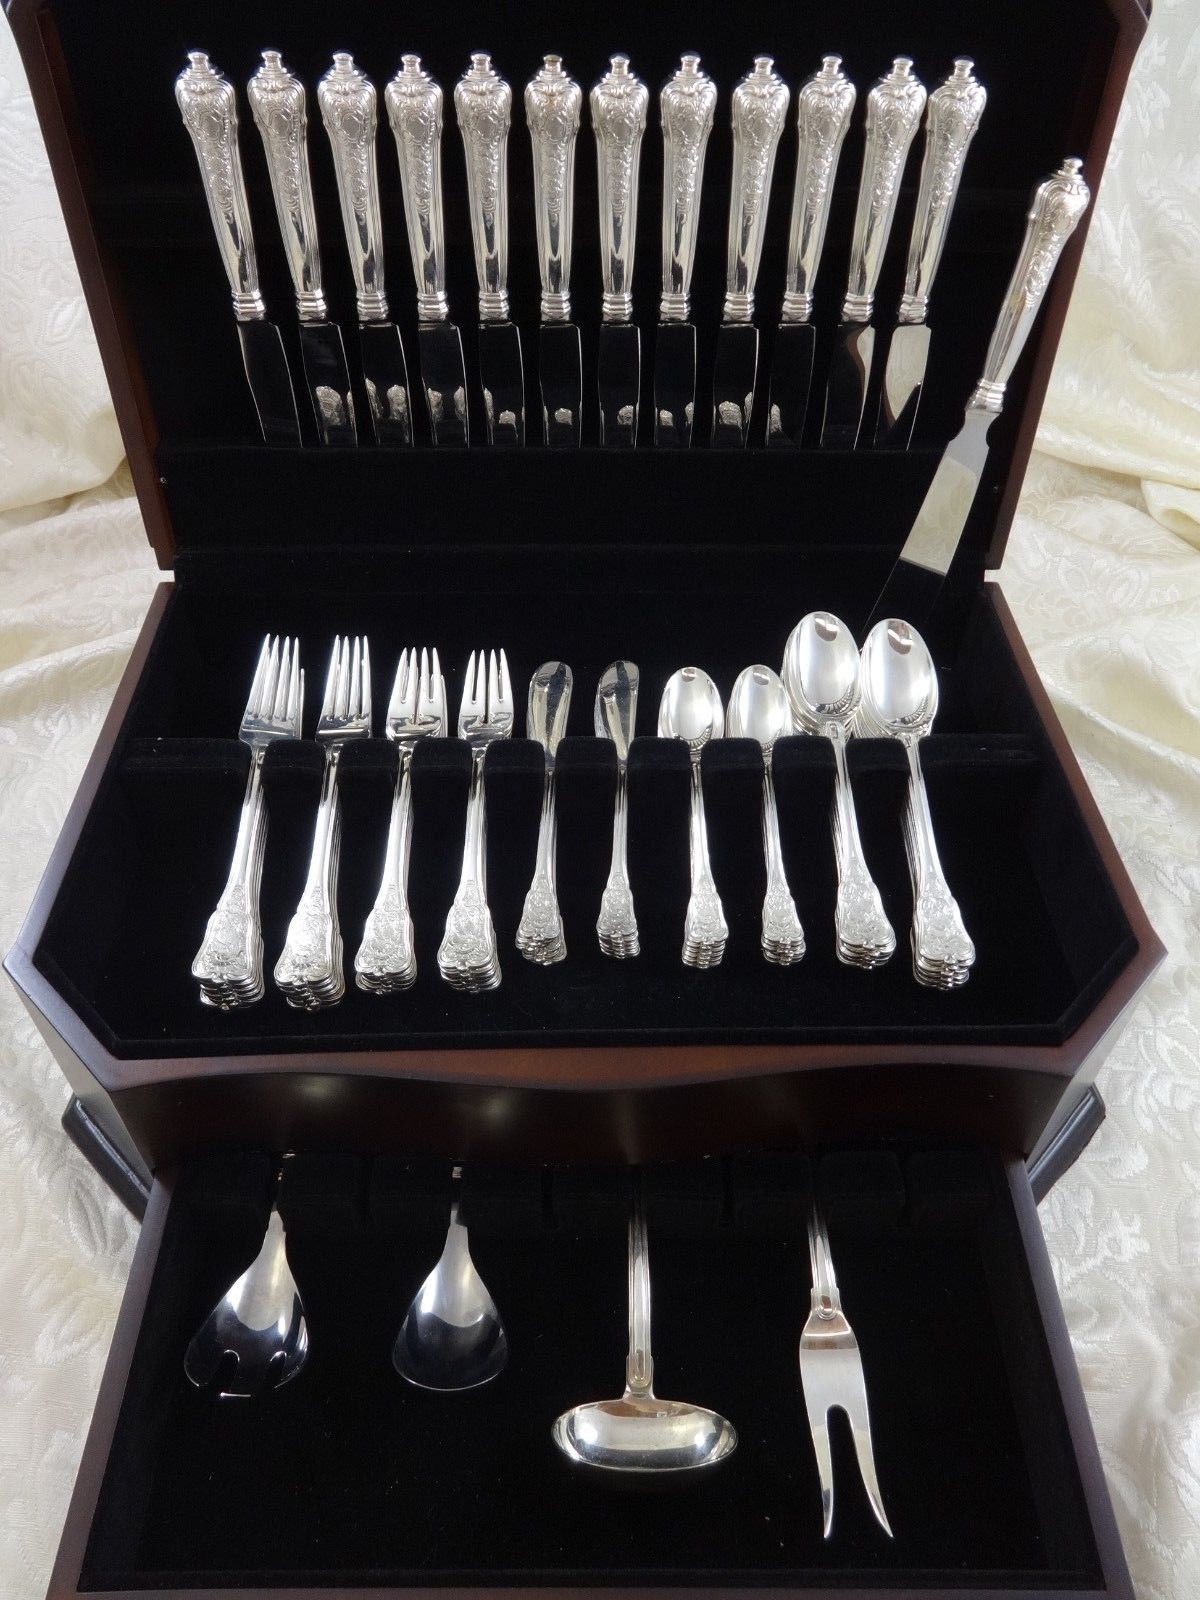 RARE Rosenborg by A. Michelsen Sterling Silver Flatware Set Service Dinner Size, 77 pieces. This beautiful set includes: 12 Dinner Knives, 9 1/4